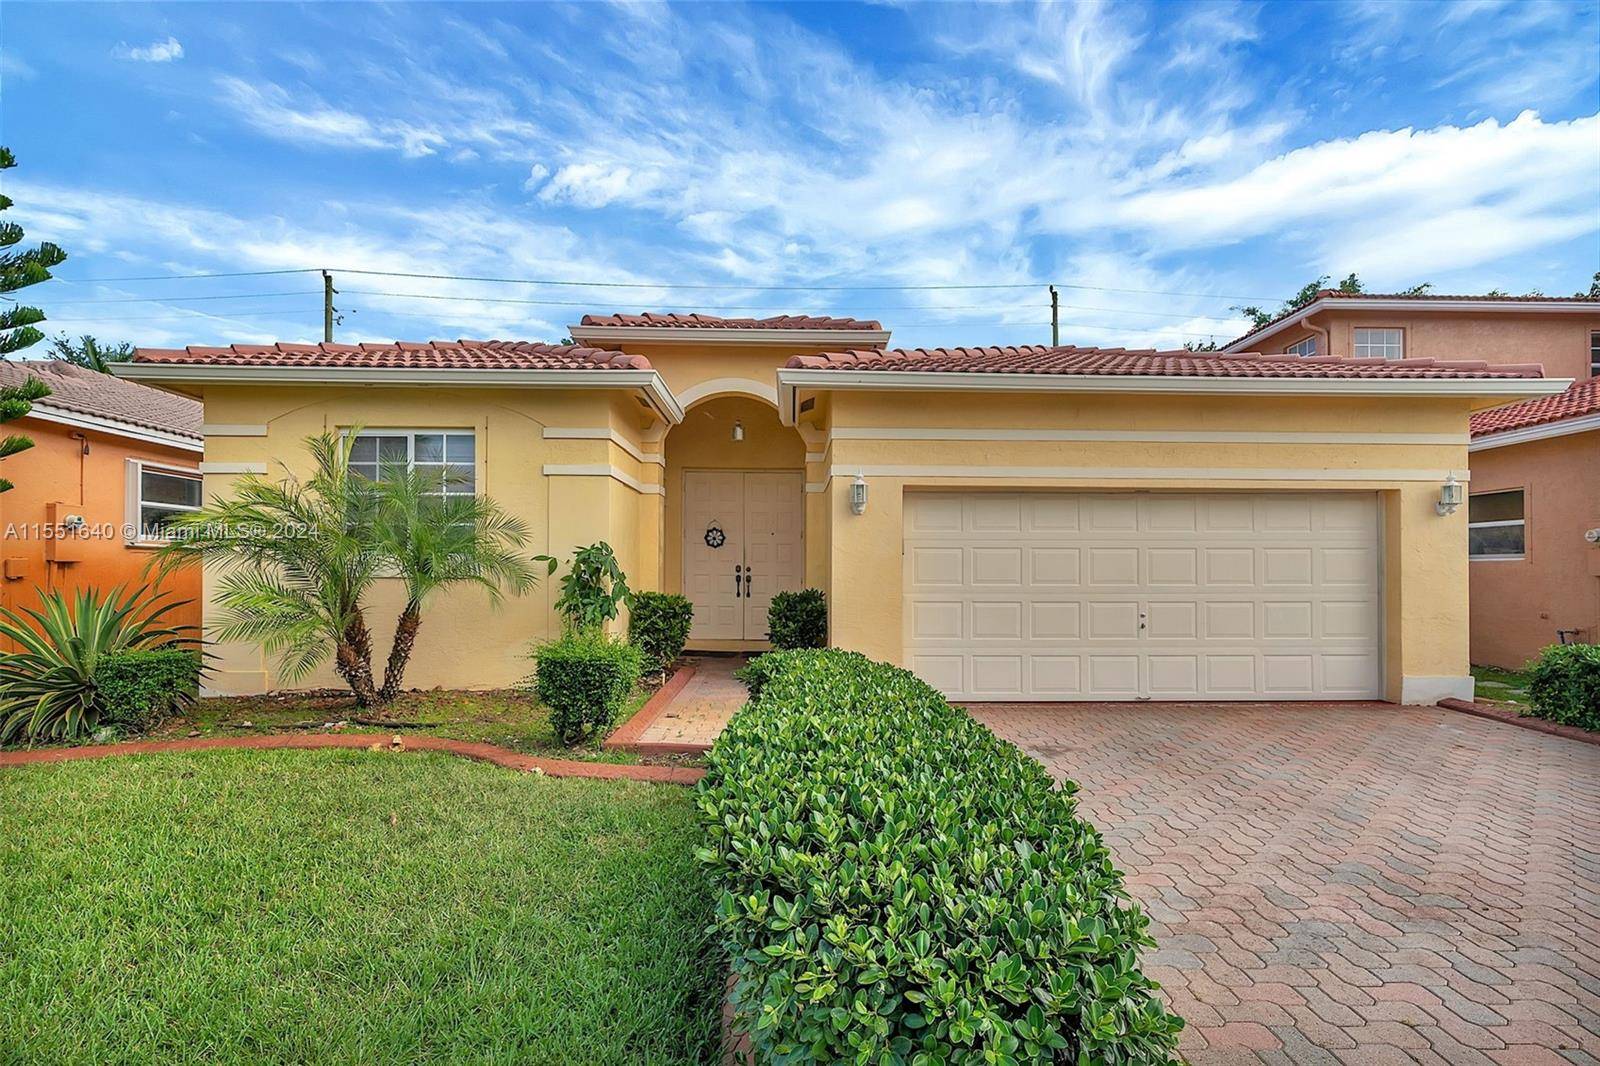 Immaculate 3 bedroom, 2 bath 2 car garage House located in the peaceful gated community of VIZCAYA !